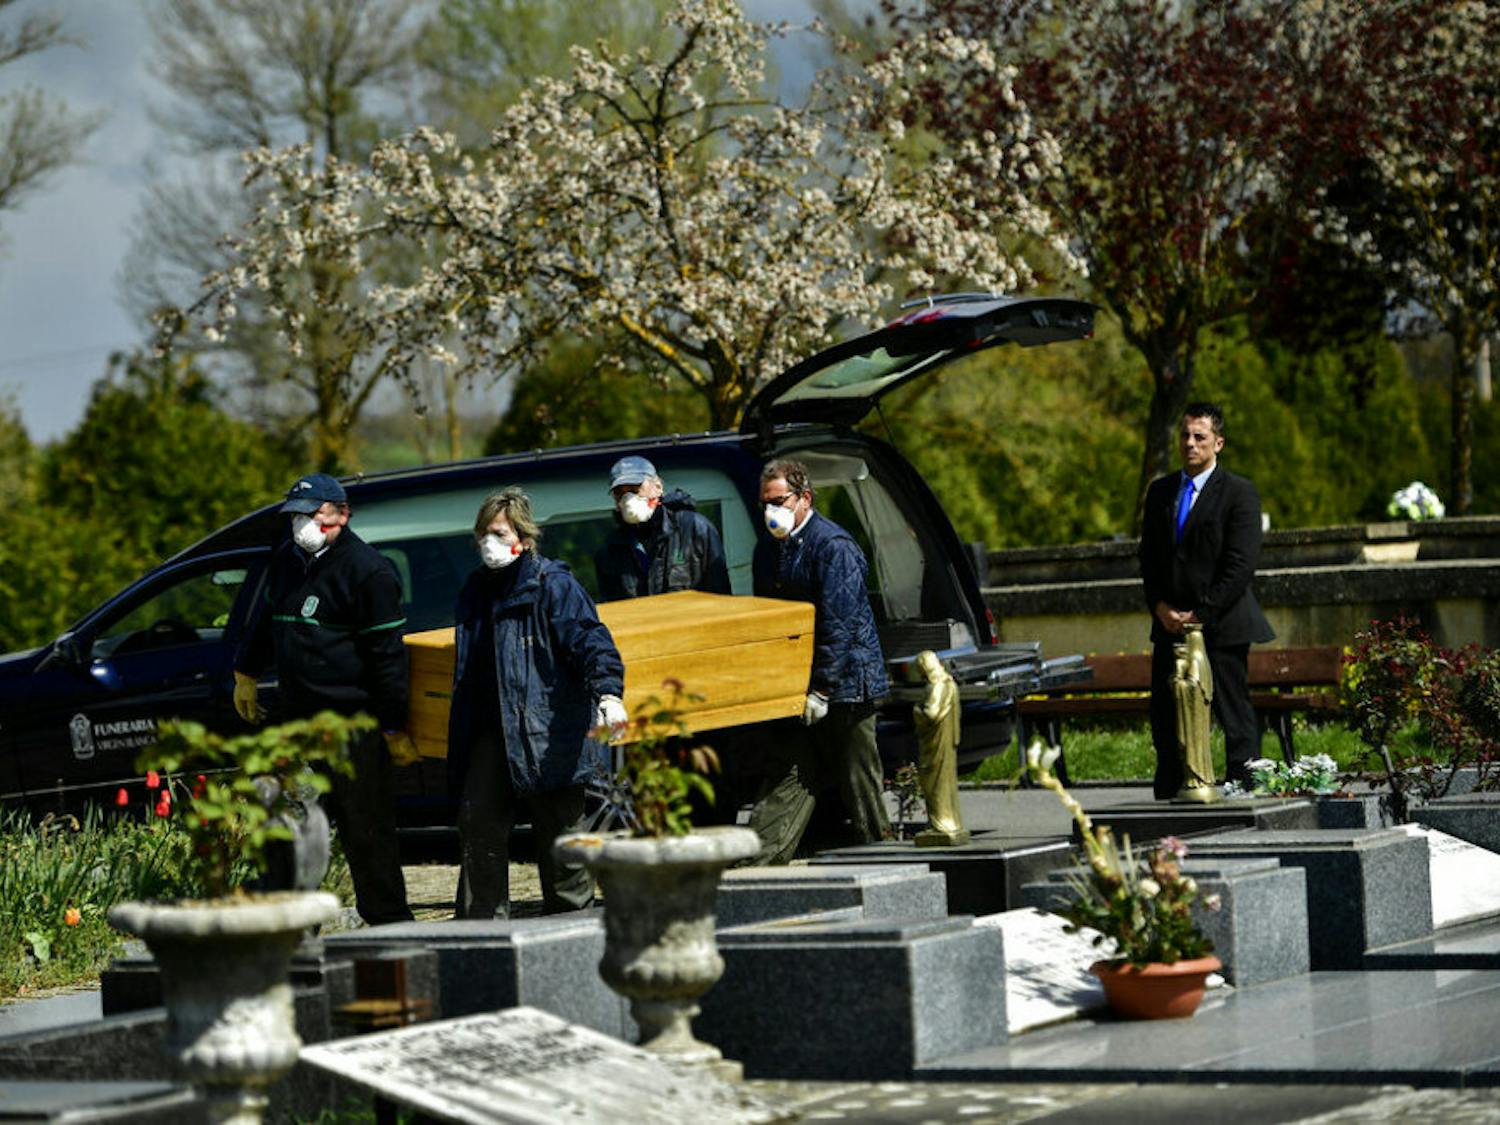 Undertakers wearing protection masks to protect from the coronavirus, carry a coffin to a burial at Salvador cemetery during the coronavirus outbreak, near to Vitoria, northern Spain, Monday, March 30, 2020. The new coronavirus causes mild or moderate symptoms for most people, but for some, especially older adults and people with existing health problems, it can cause more severe illness or death. (AP Photo/Alvaro Barrientos)